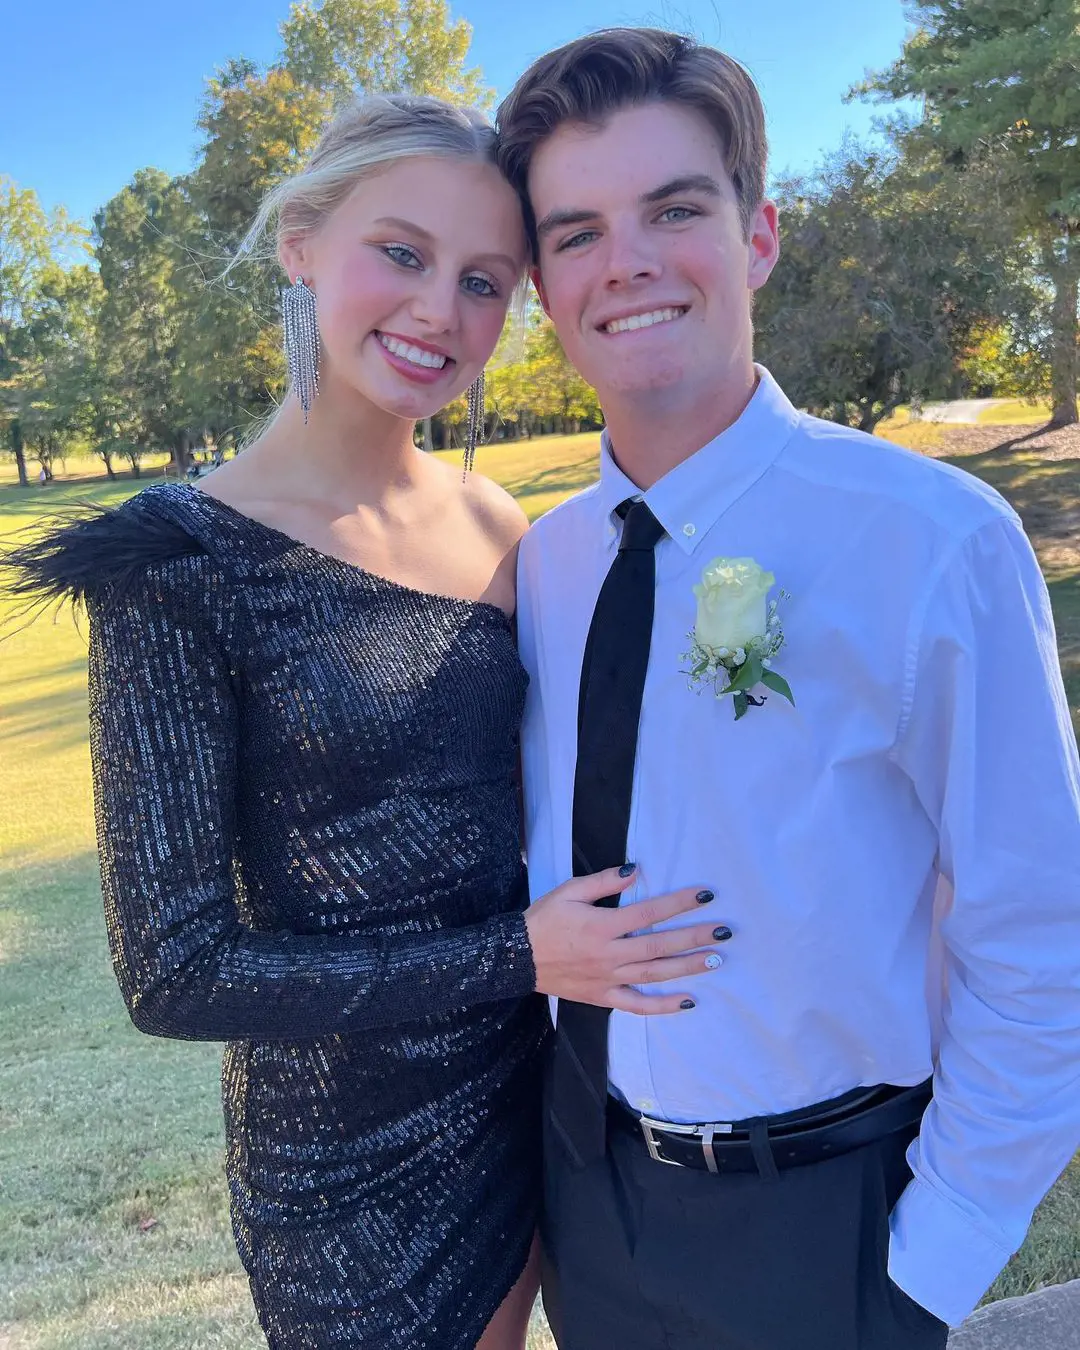 Haven had a great time with her partner in Prom in Clarksville Country Club on October 2, 2022.